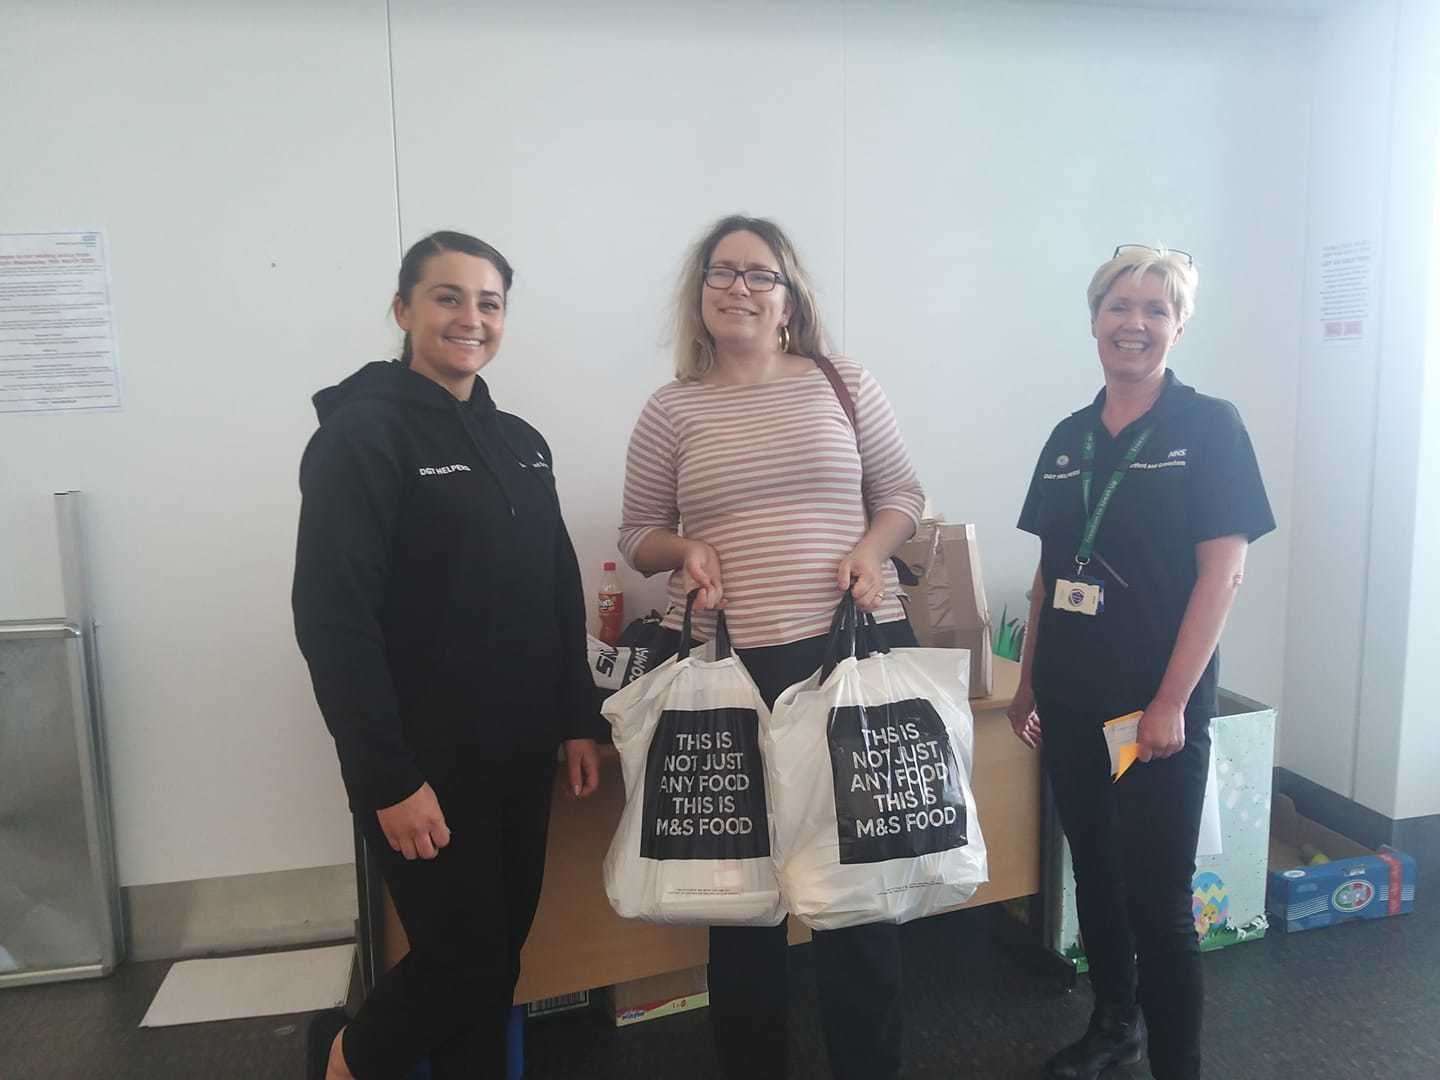 Dartford Cllr Kelly Grehan dropping of donations at Darent Valley Hospital, to help support frontline workers battling Covid-19